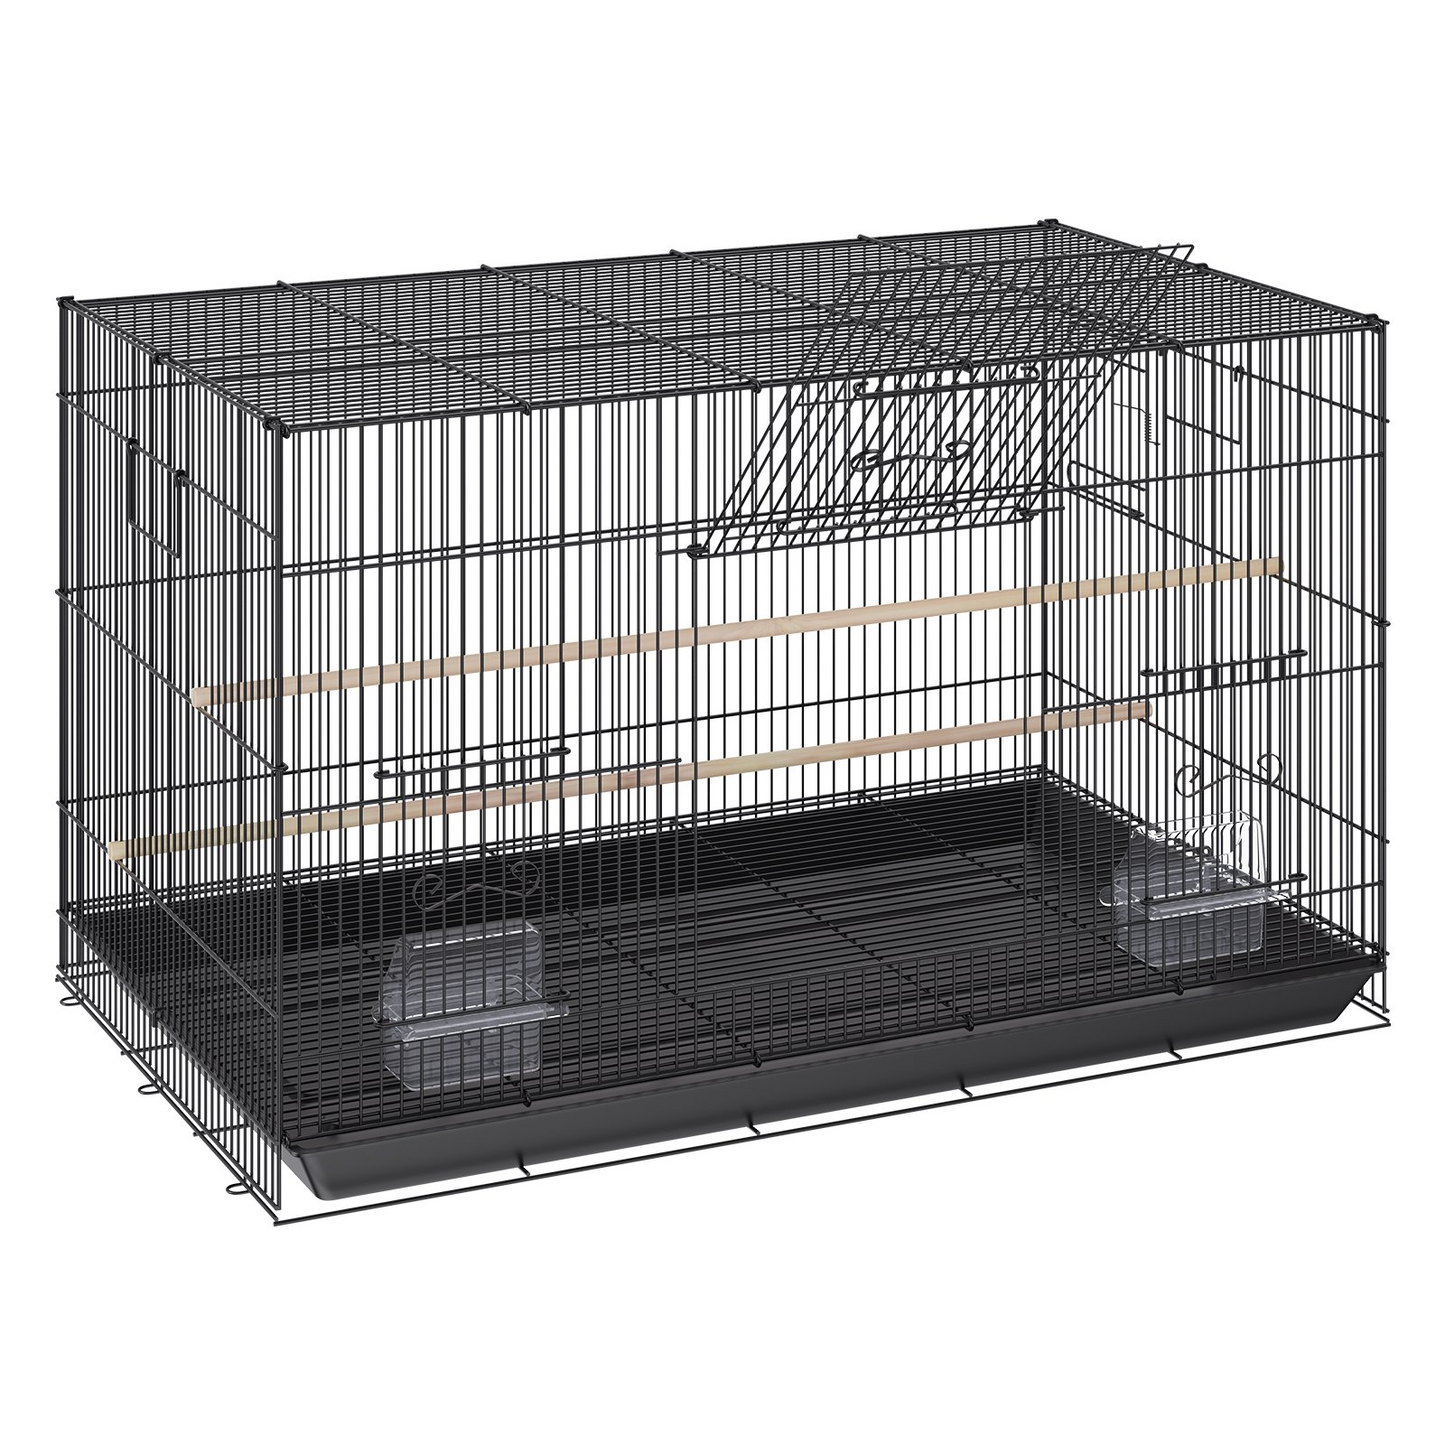 VEVOR 30 inch Bird Cage, Metal Large Parakeet Cages for Cockatiels Small Parrot Budgies Lovebirds Canaries, Pet Bird Cage with Rolling Stand and Tray